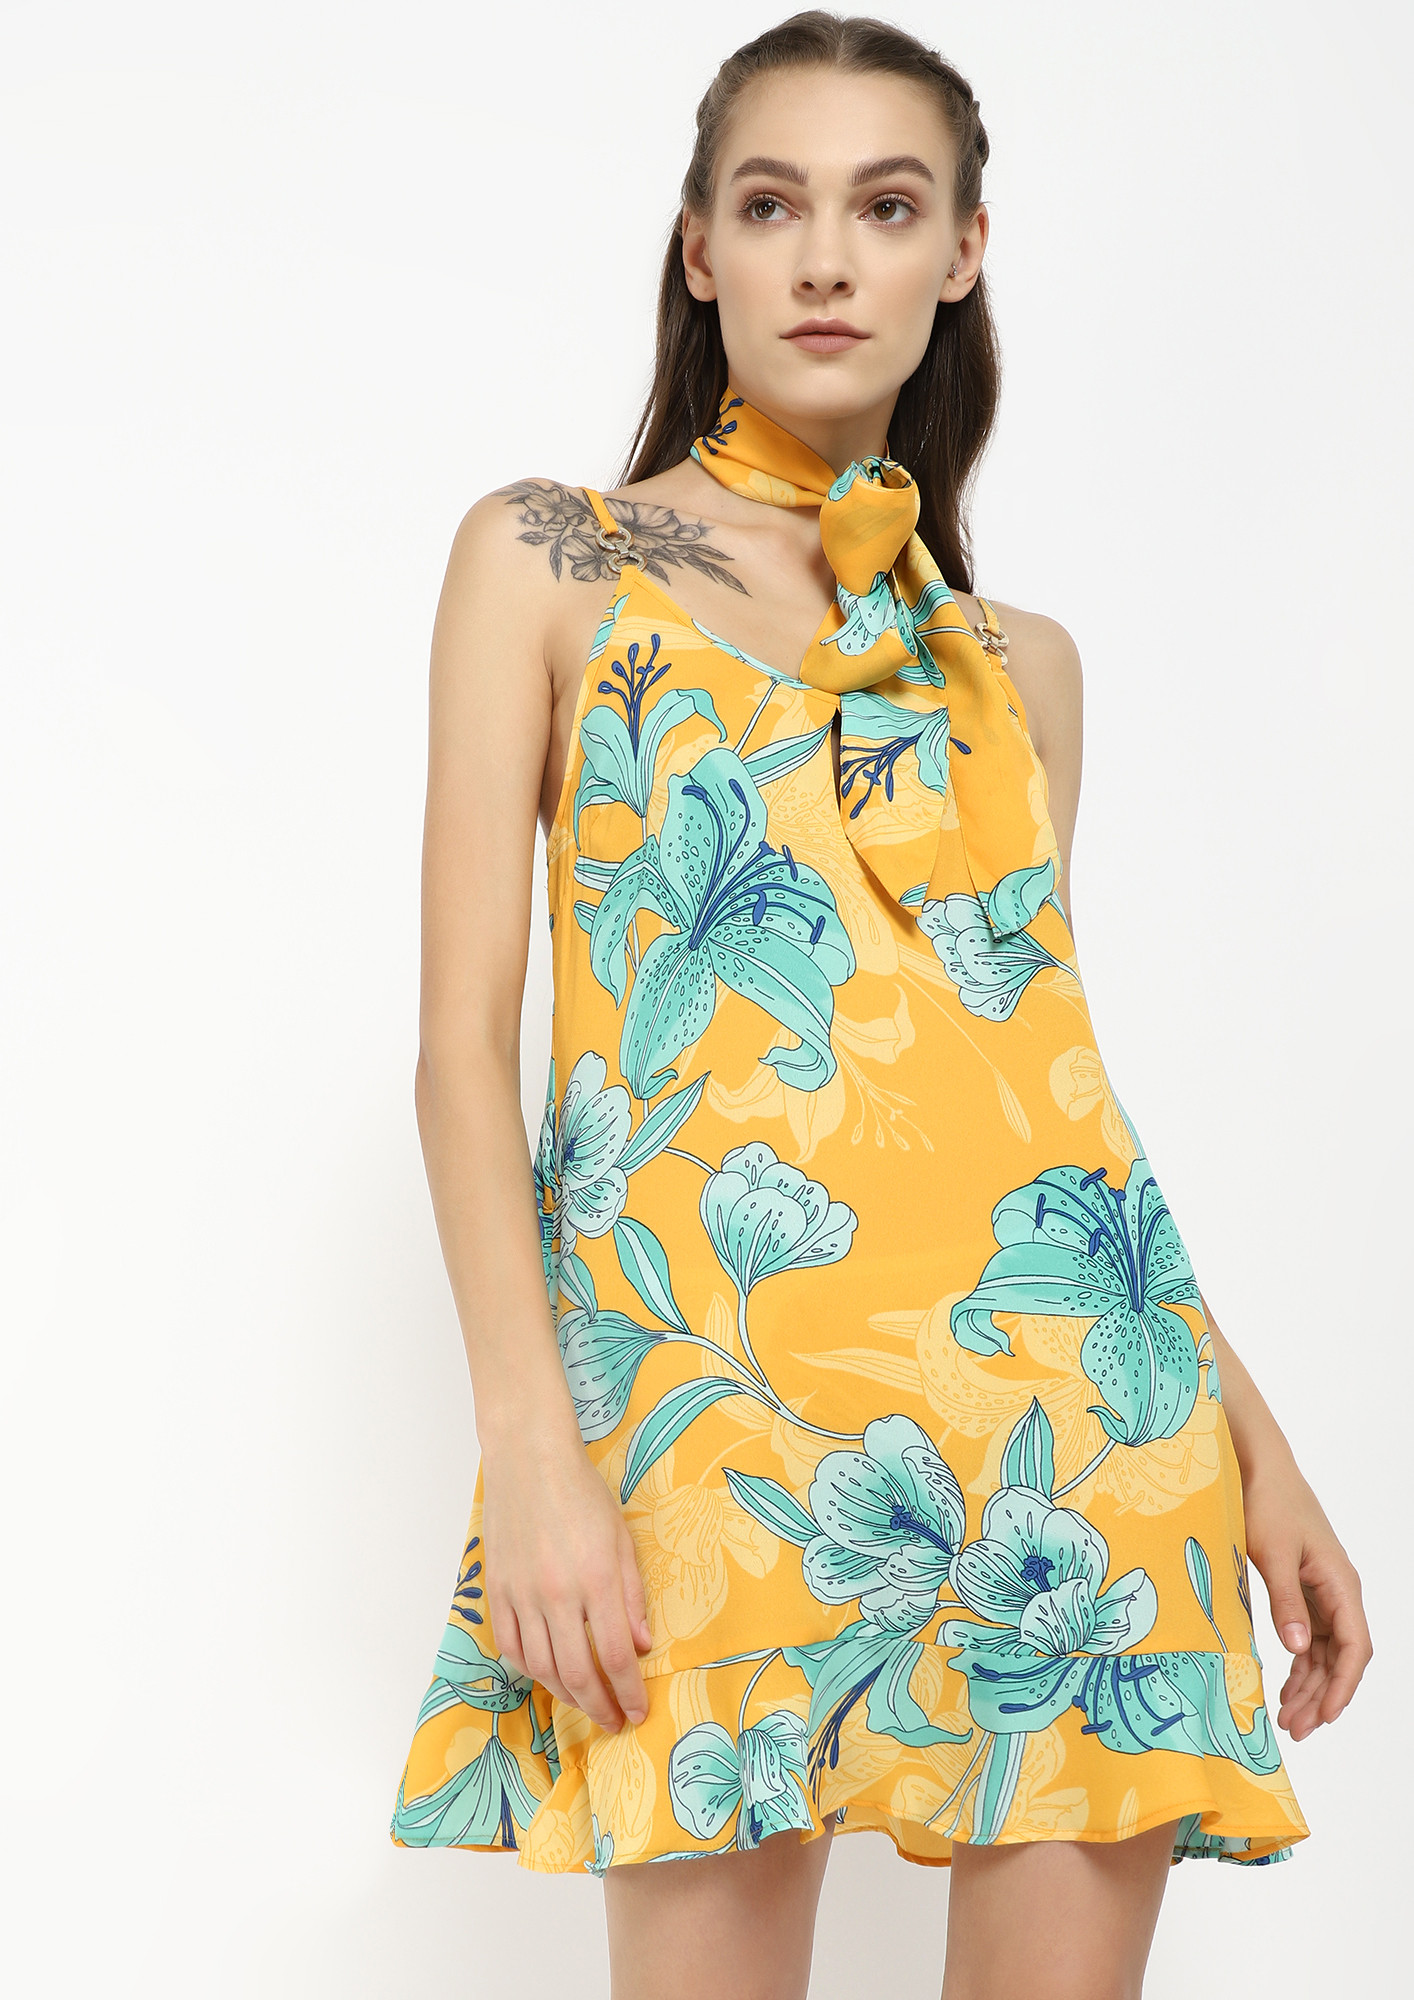 BLOOMING FROM WITHIN YELLOW SHIFT DRESS